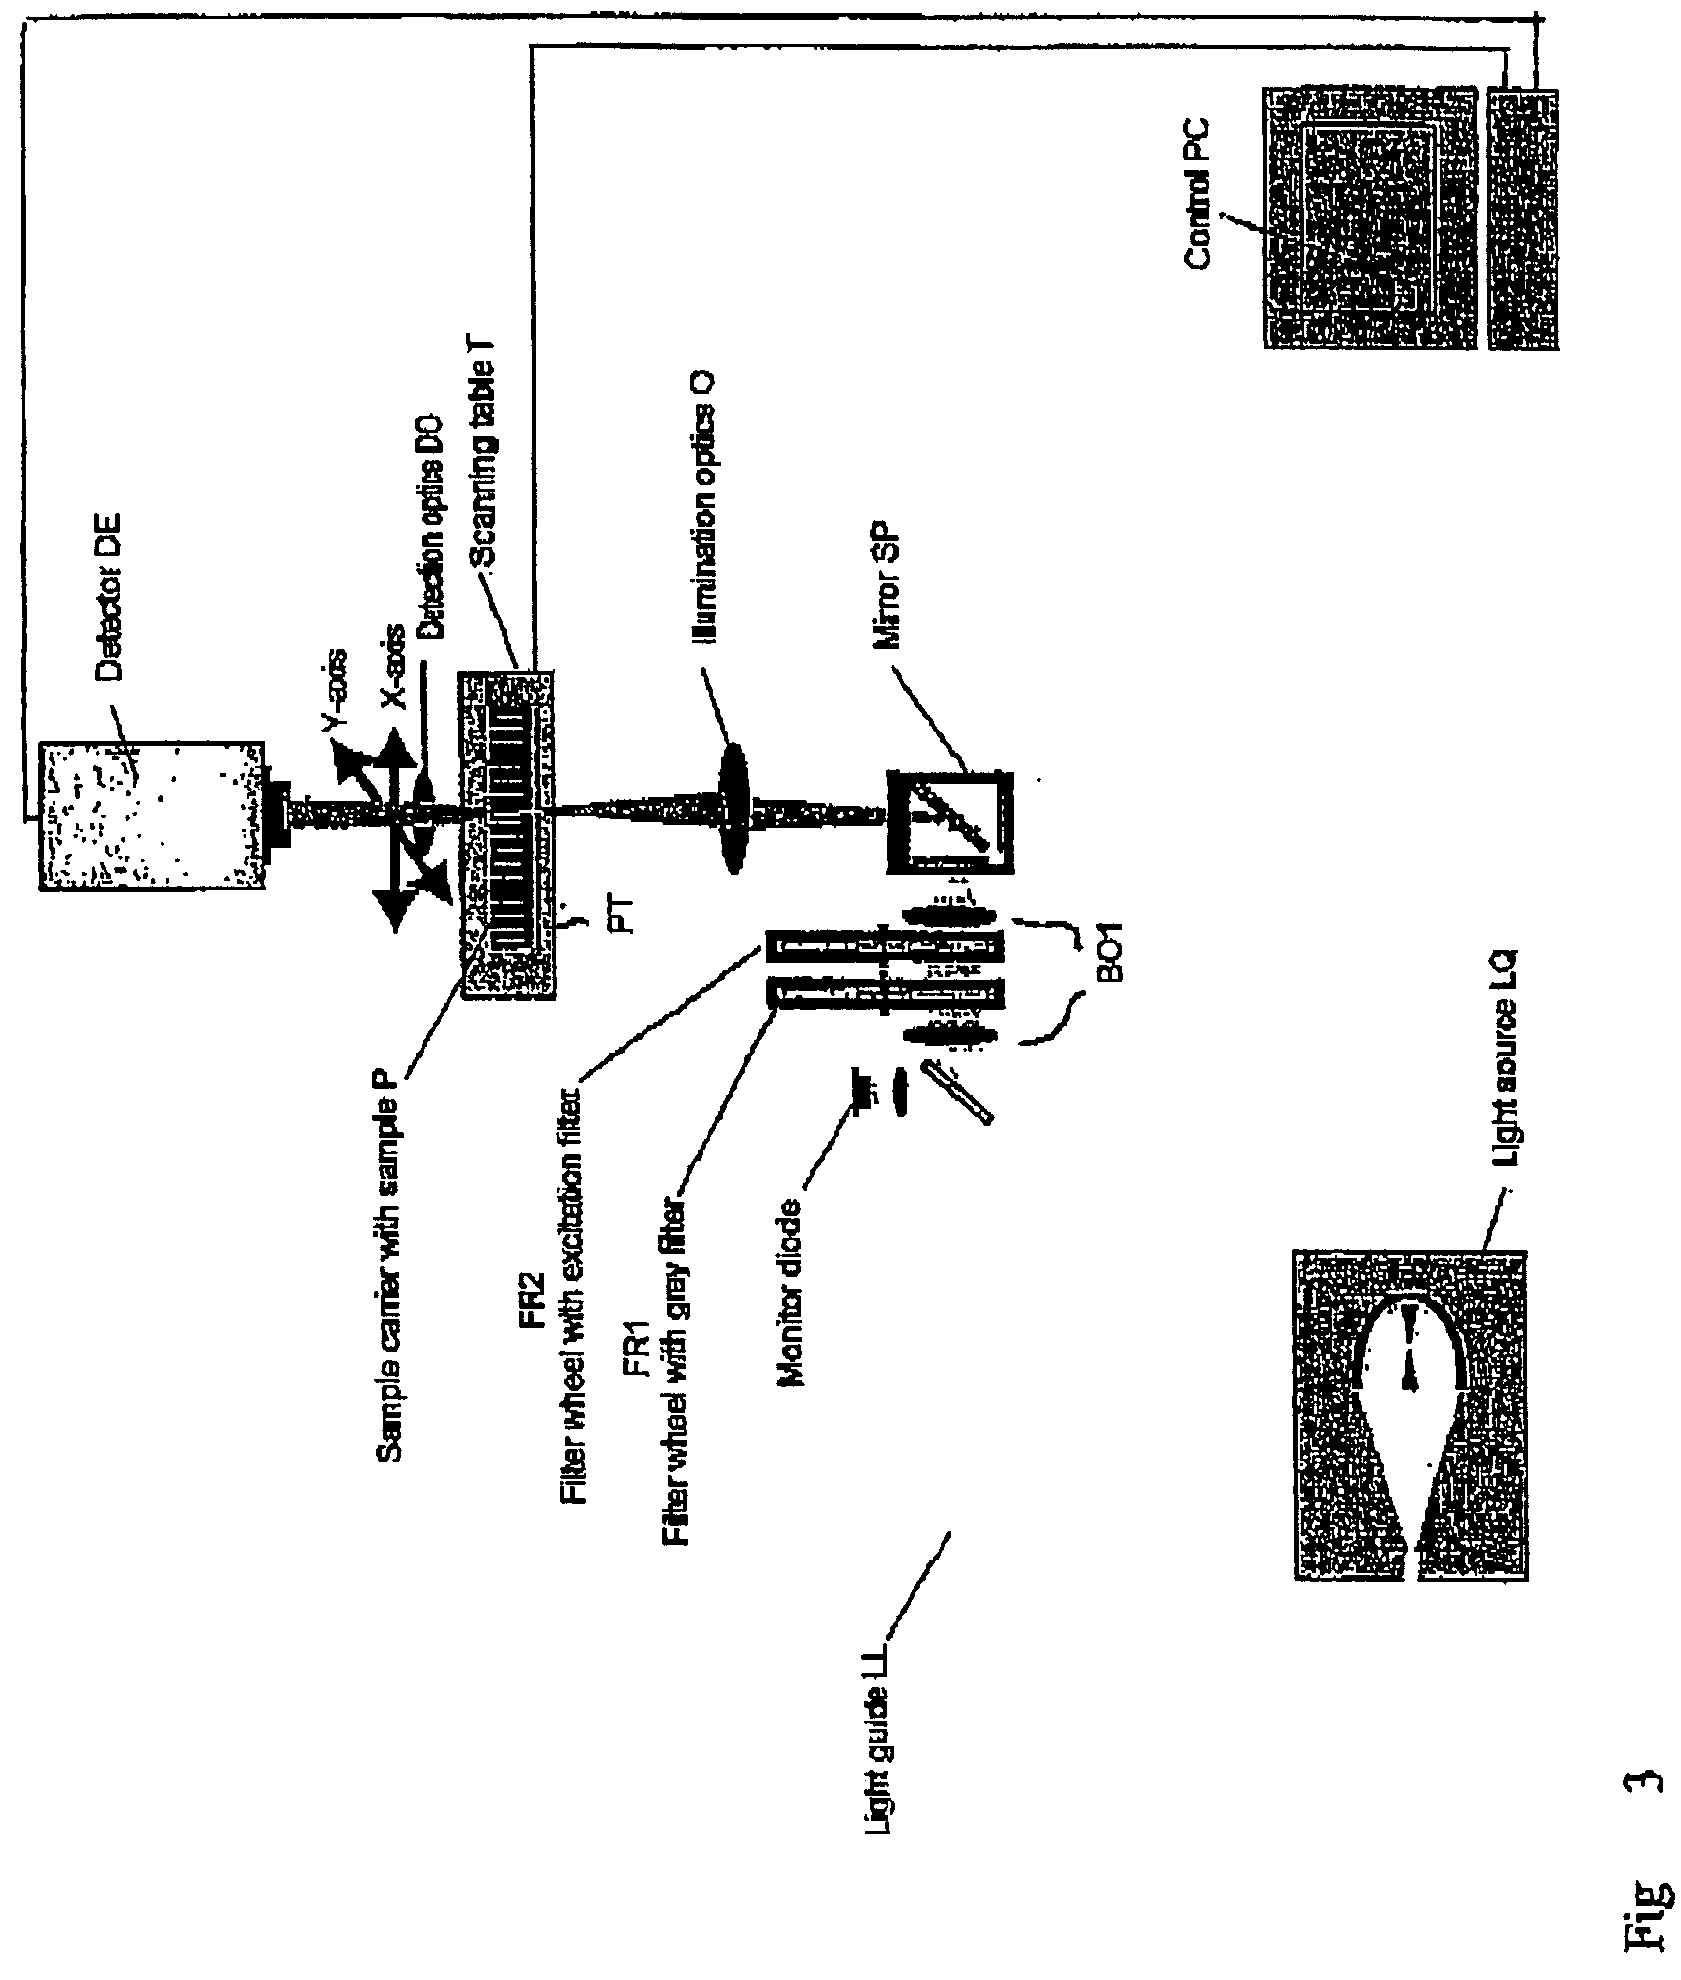 Method and/or system for identifying fluorescent, luminescent and/or absorbing substances on and/or in sample carriers